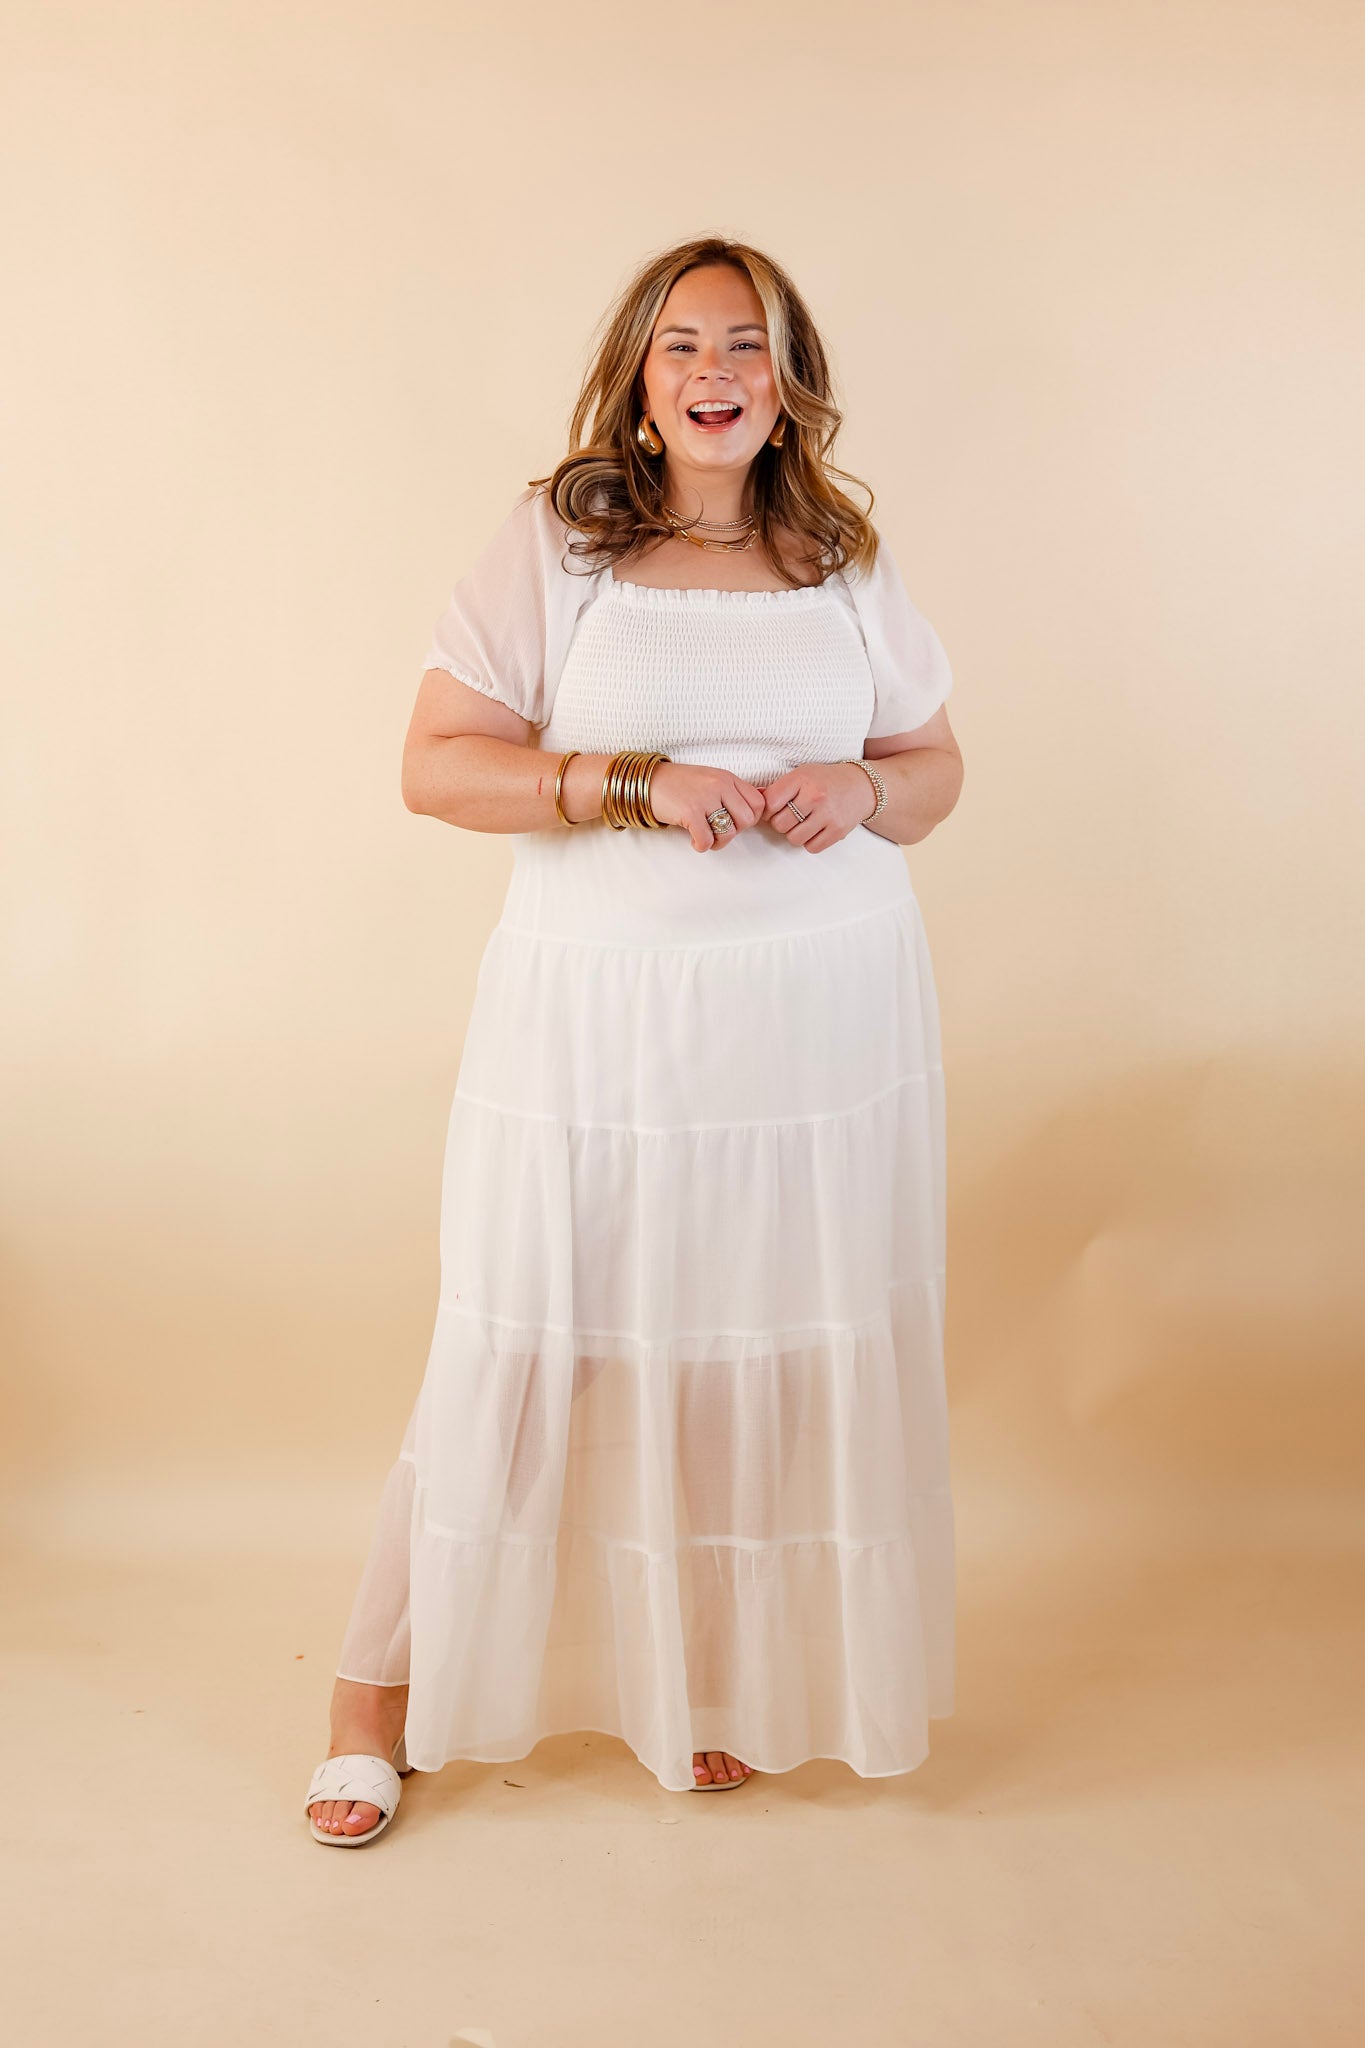 Honeysuckle Love Tiered Maxi Dress with Smocked Bodice in Ivory - Giddy Up Glamour Boutique